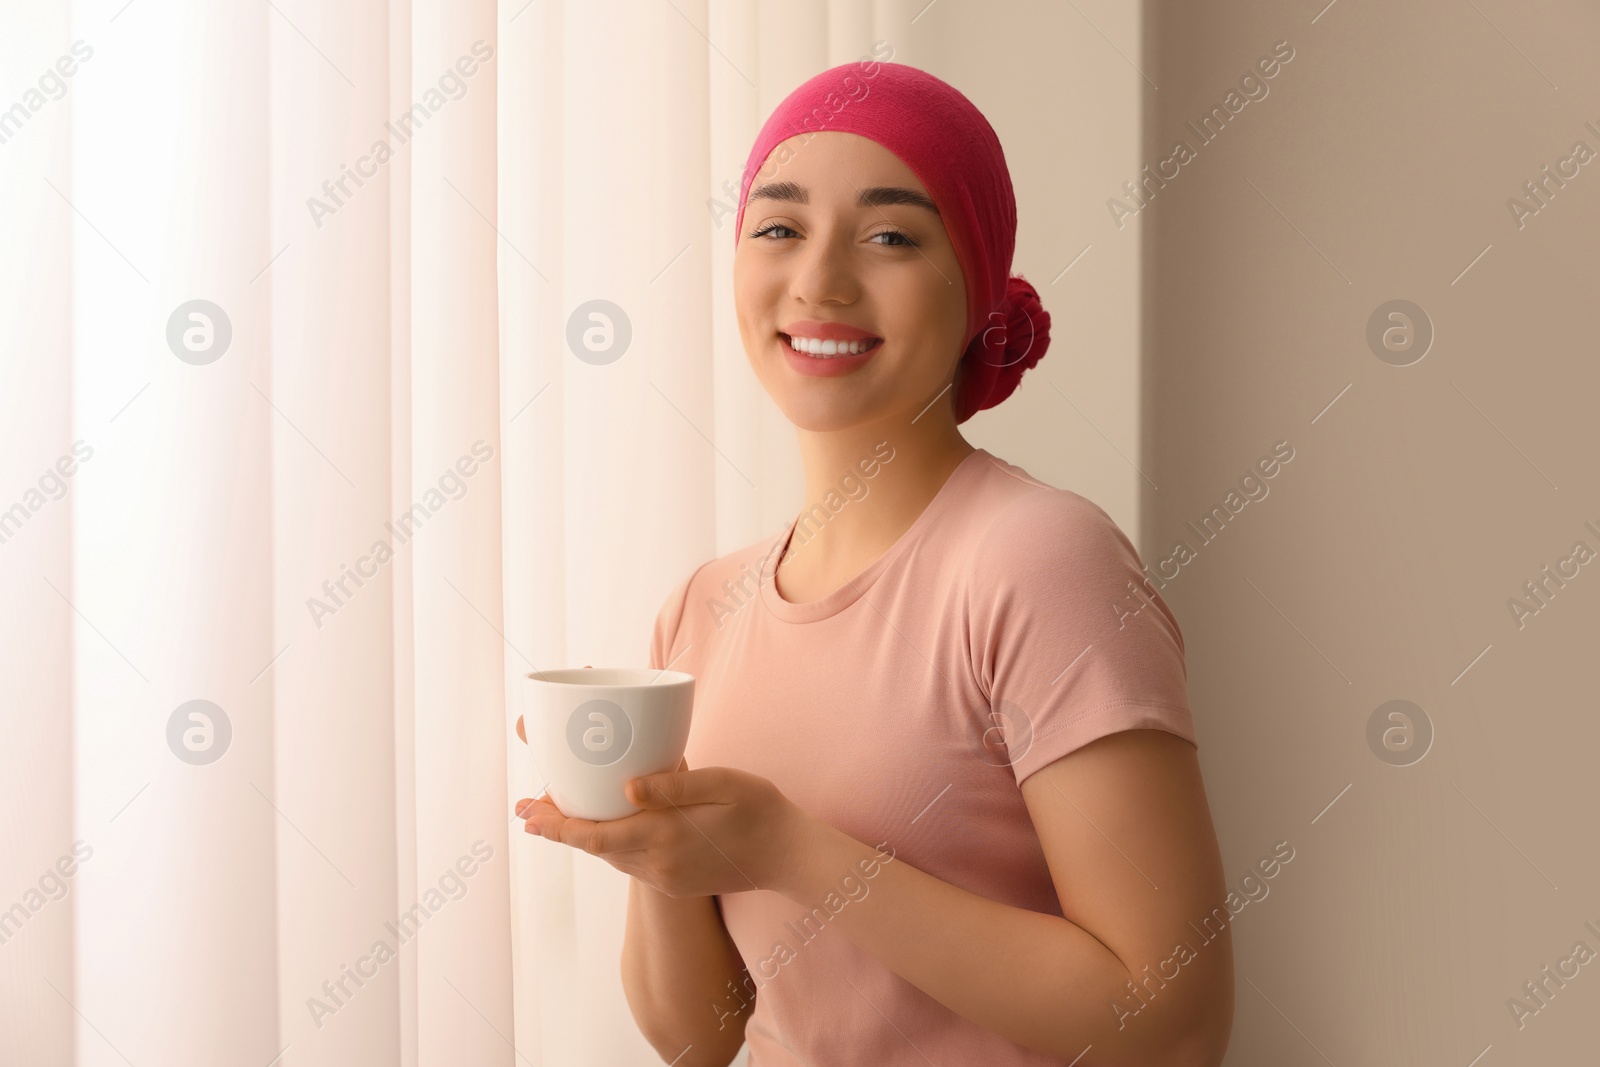 Photo of Cancer patient. Young woman with headscarf and hot drink near window indoors